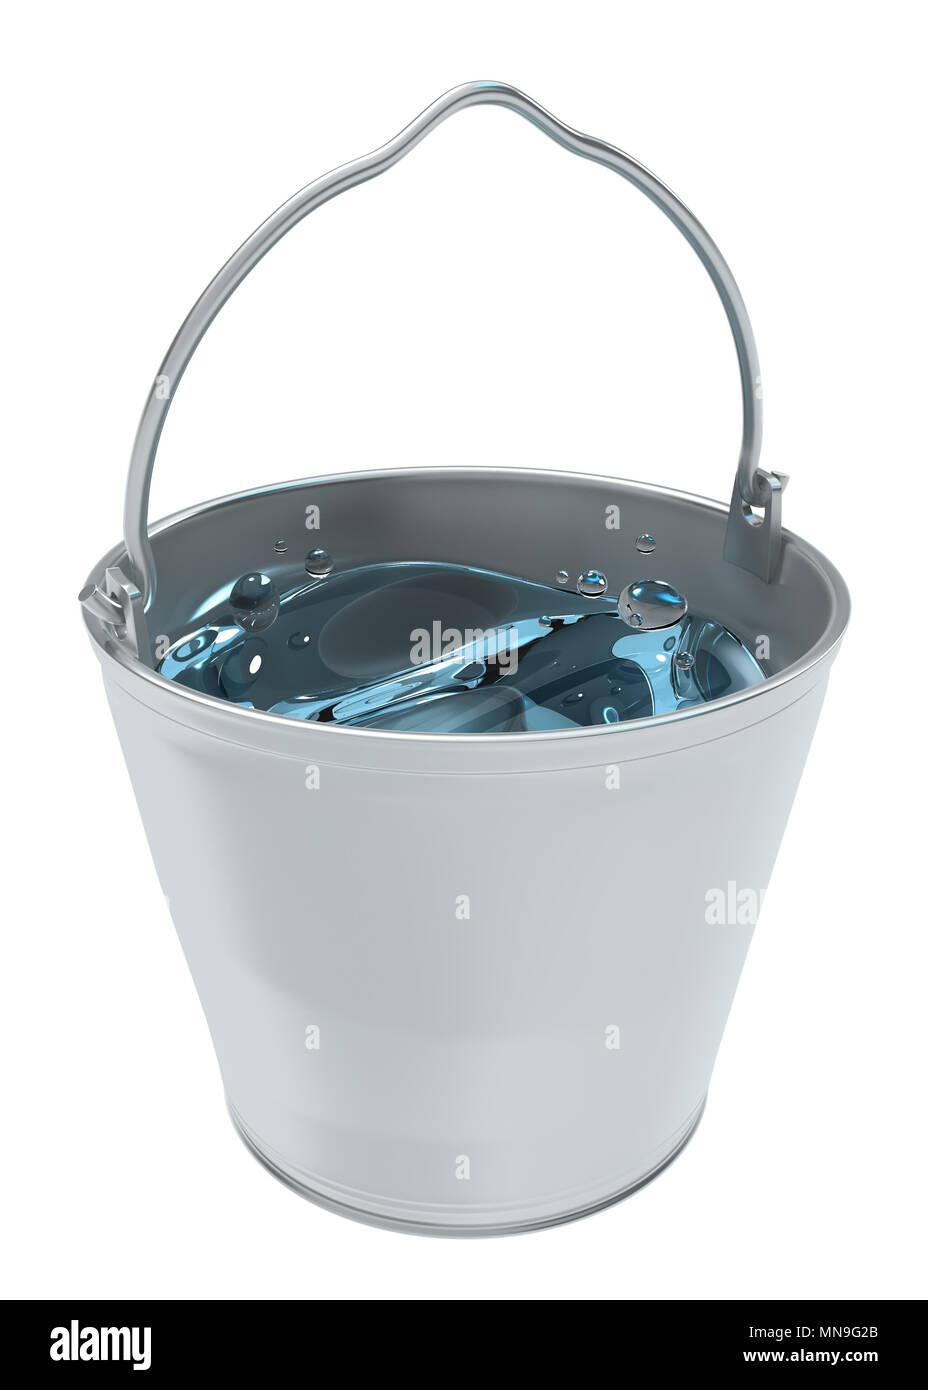 200,379 Water Bucket Images, Stock Photos, 3D objects, & Vectors